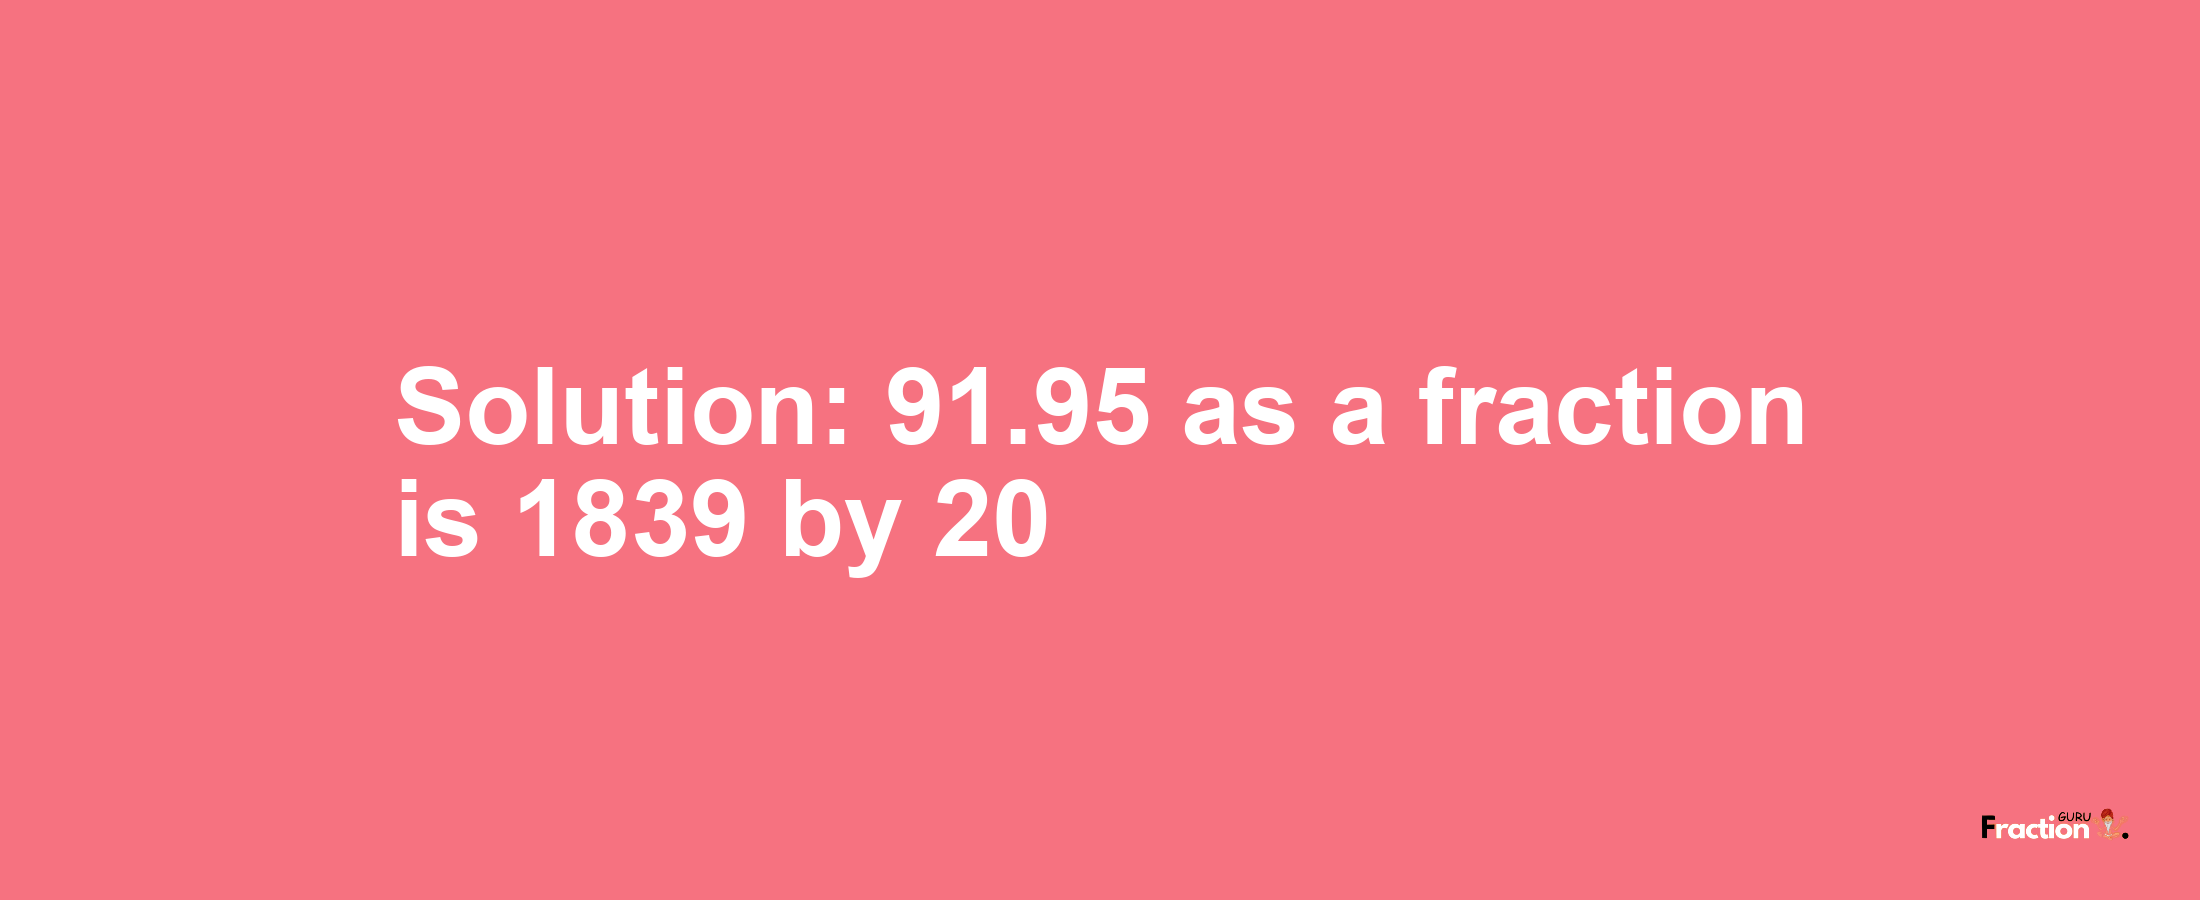 Solution:91.95 as a fraction is 1839/20